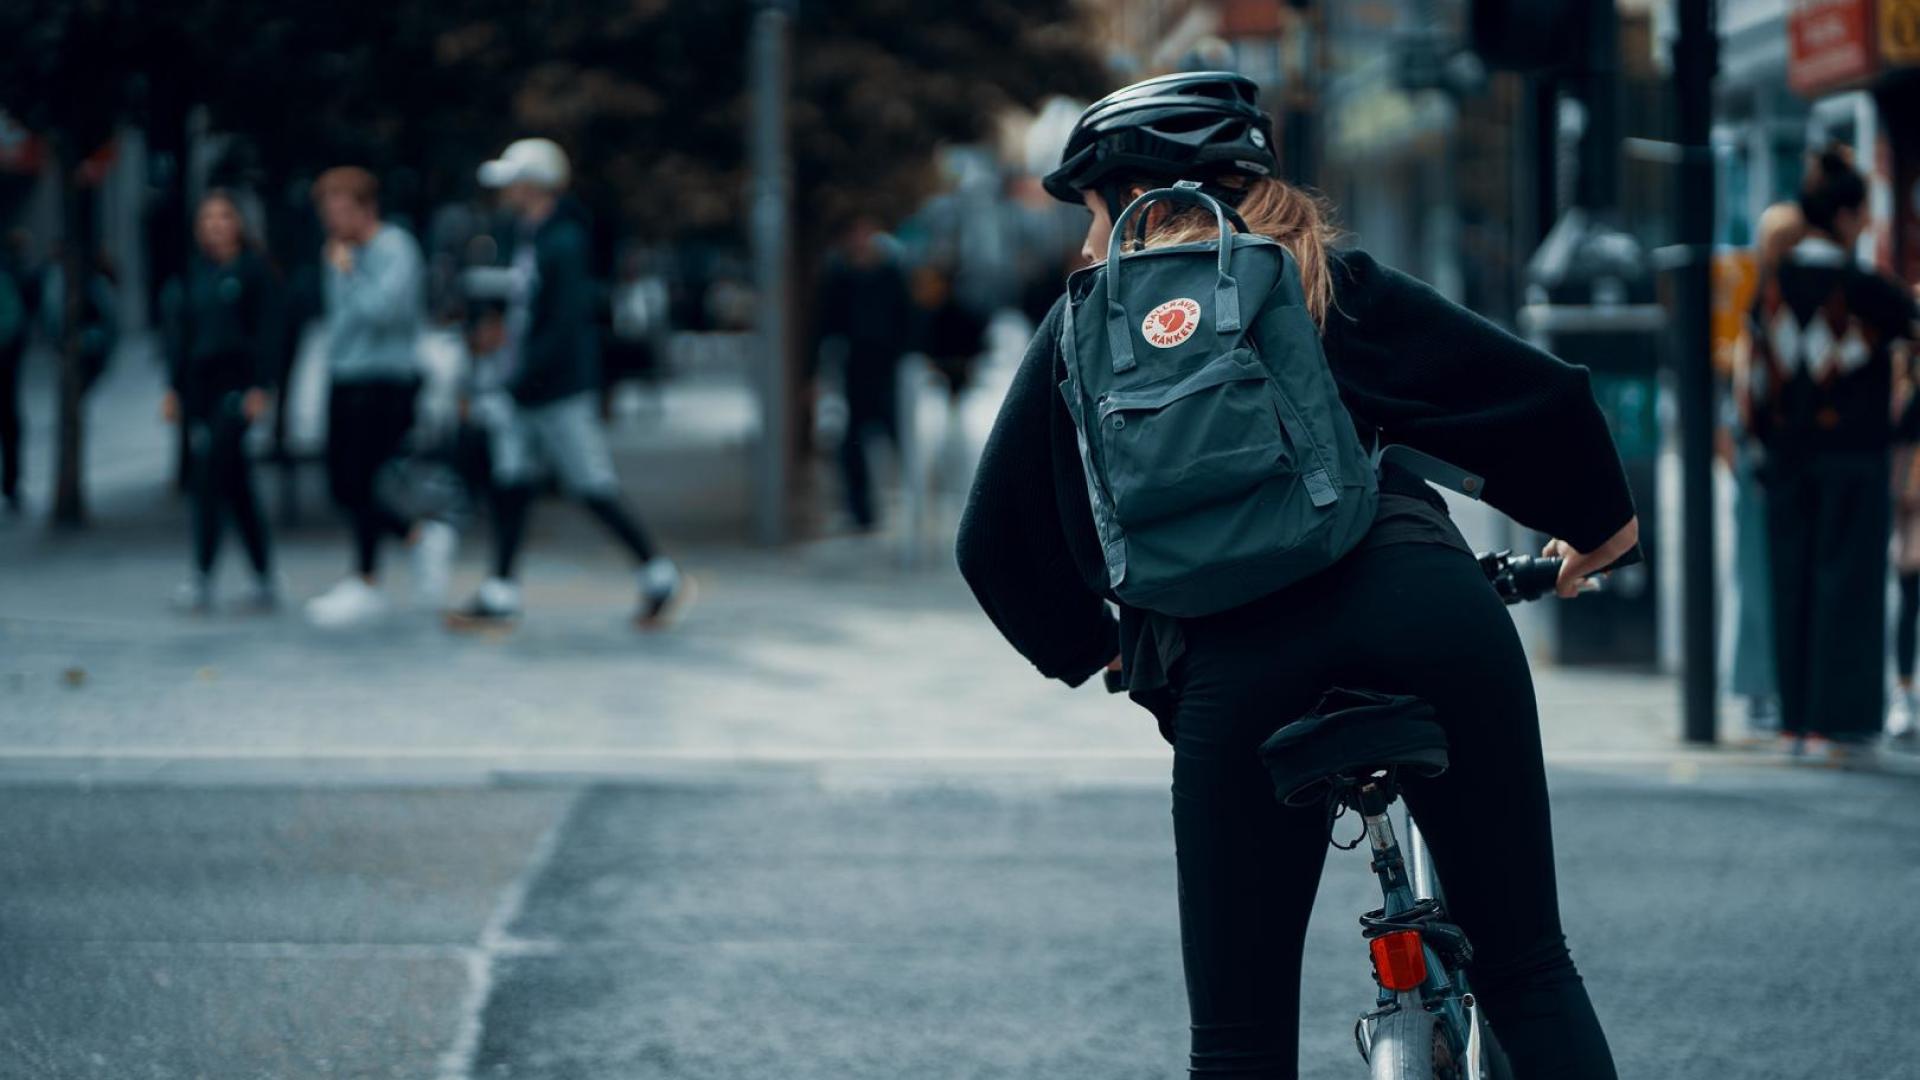 A woman in a helmet riding a bike to work